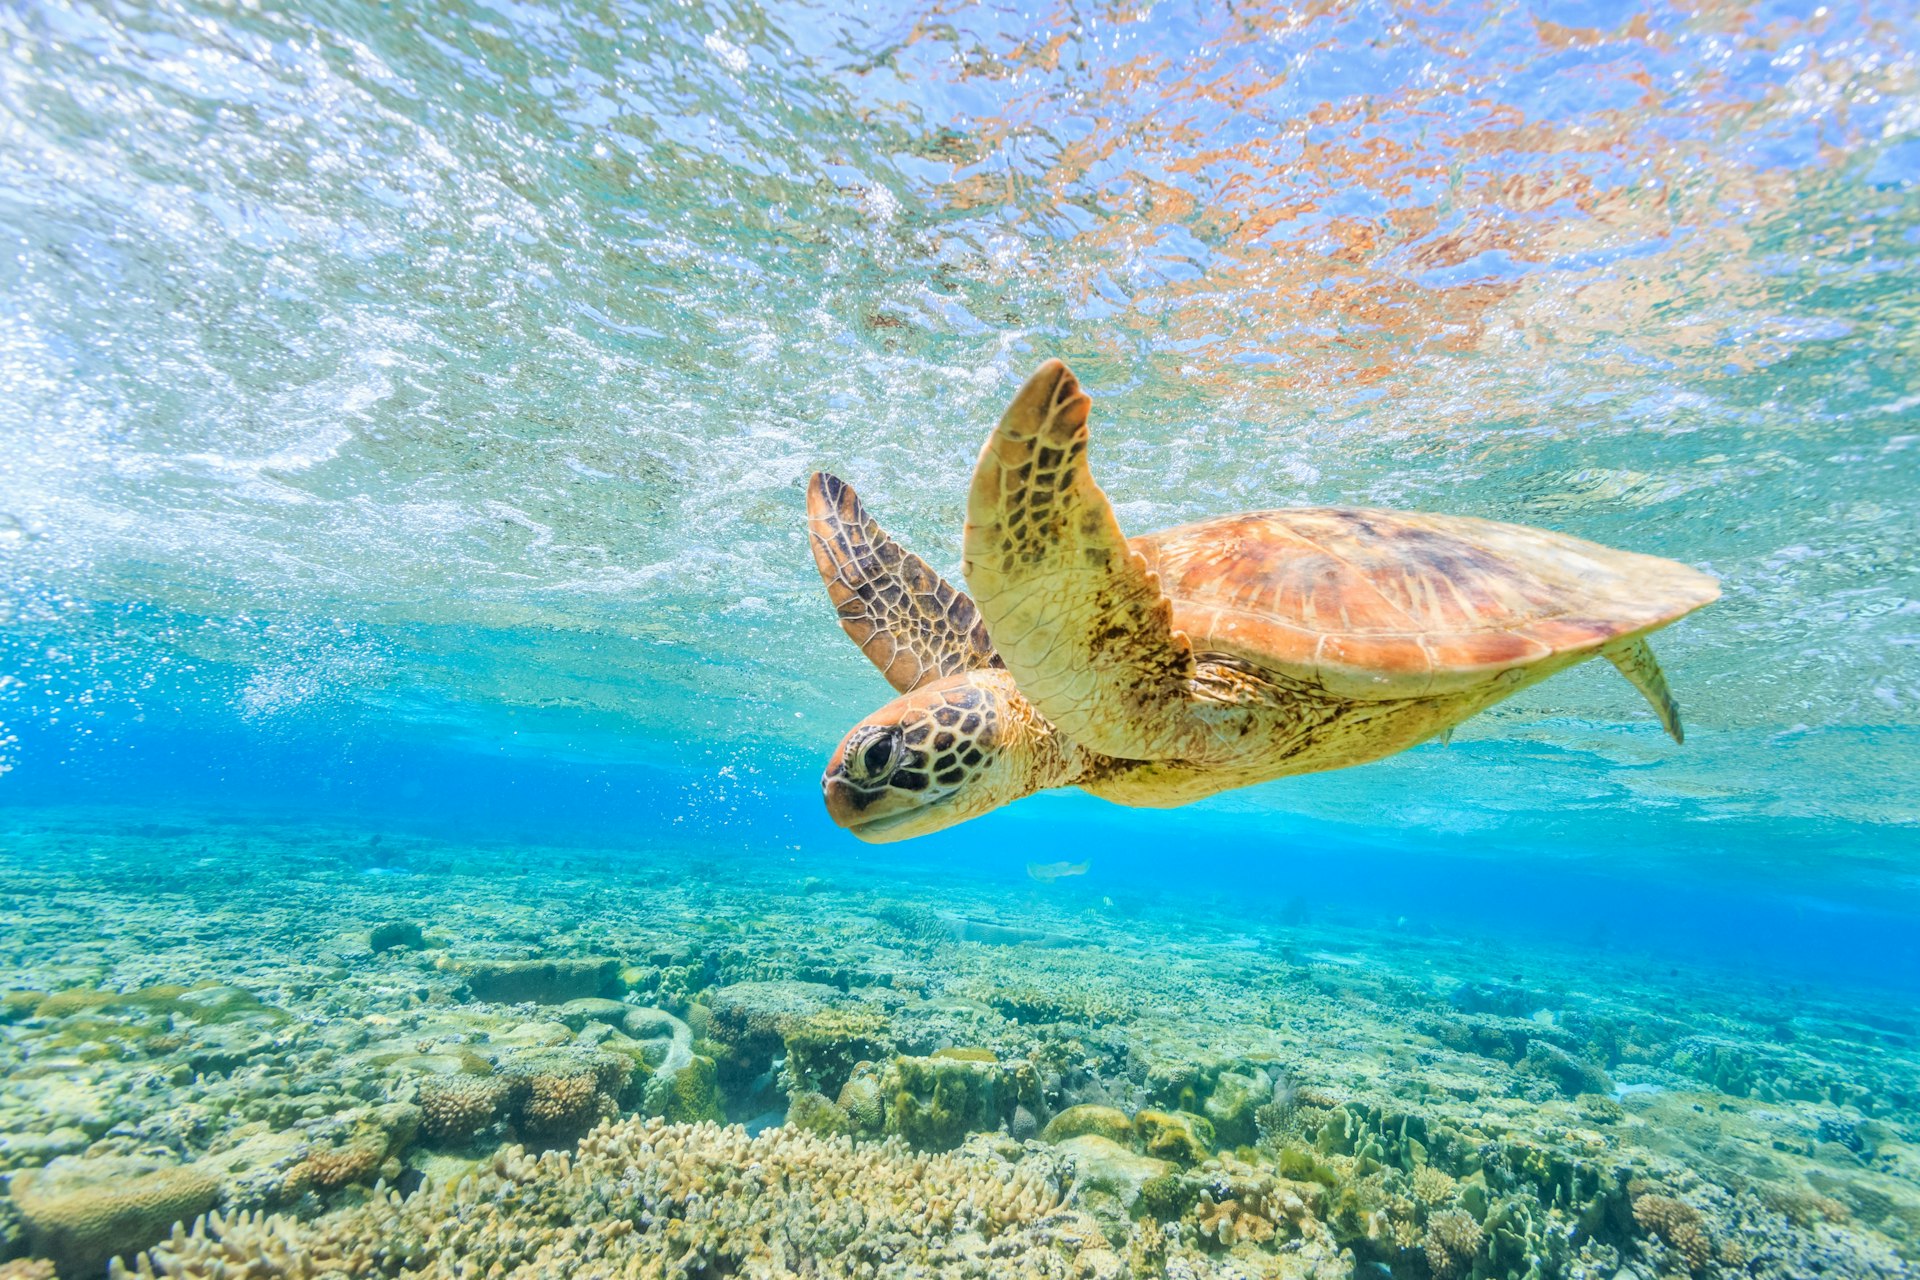 A turtle swims through the clear waters off the coast of Lady Elliot Island, Australia. Colourful corals cover the seabed.